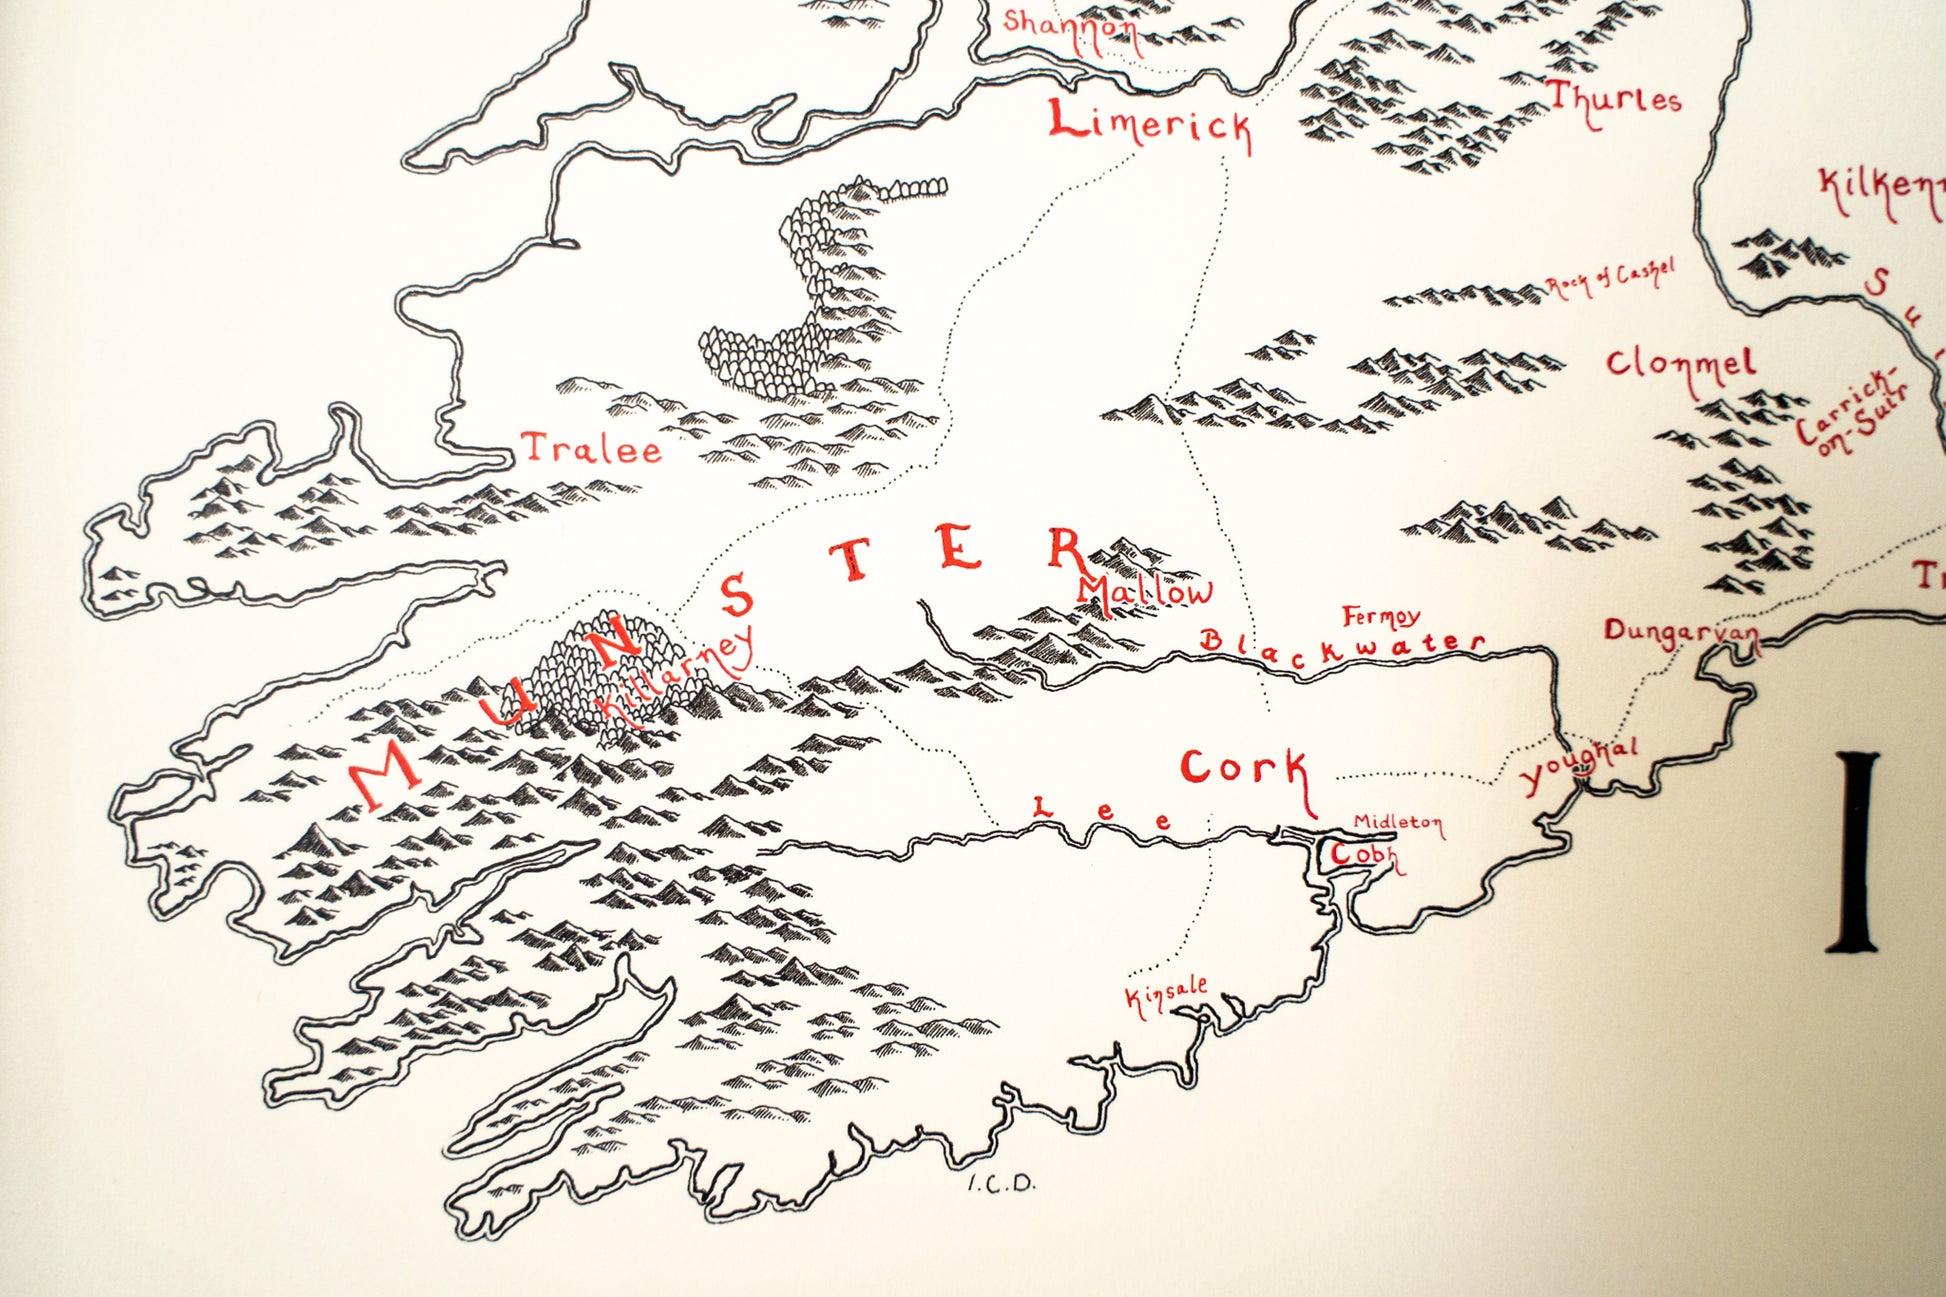 Why the south of Westeros is the north of Ireland - Big Think